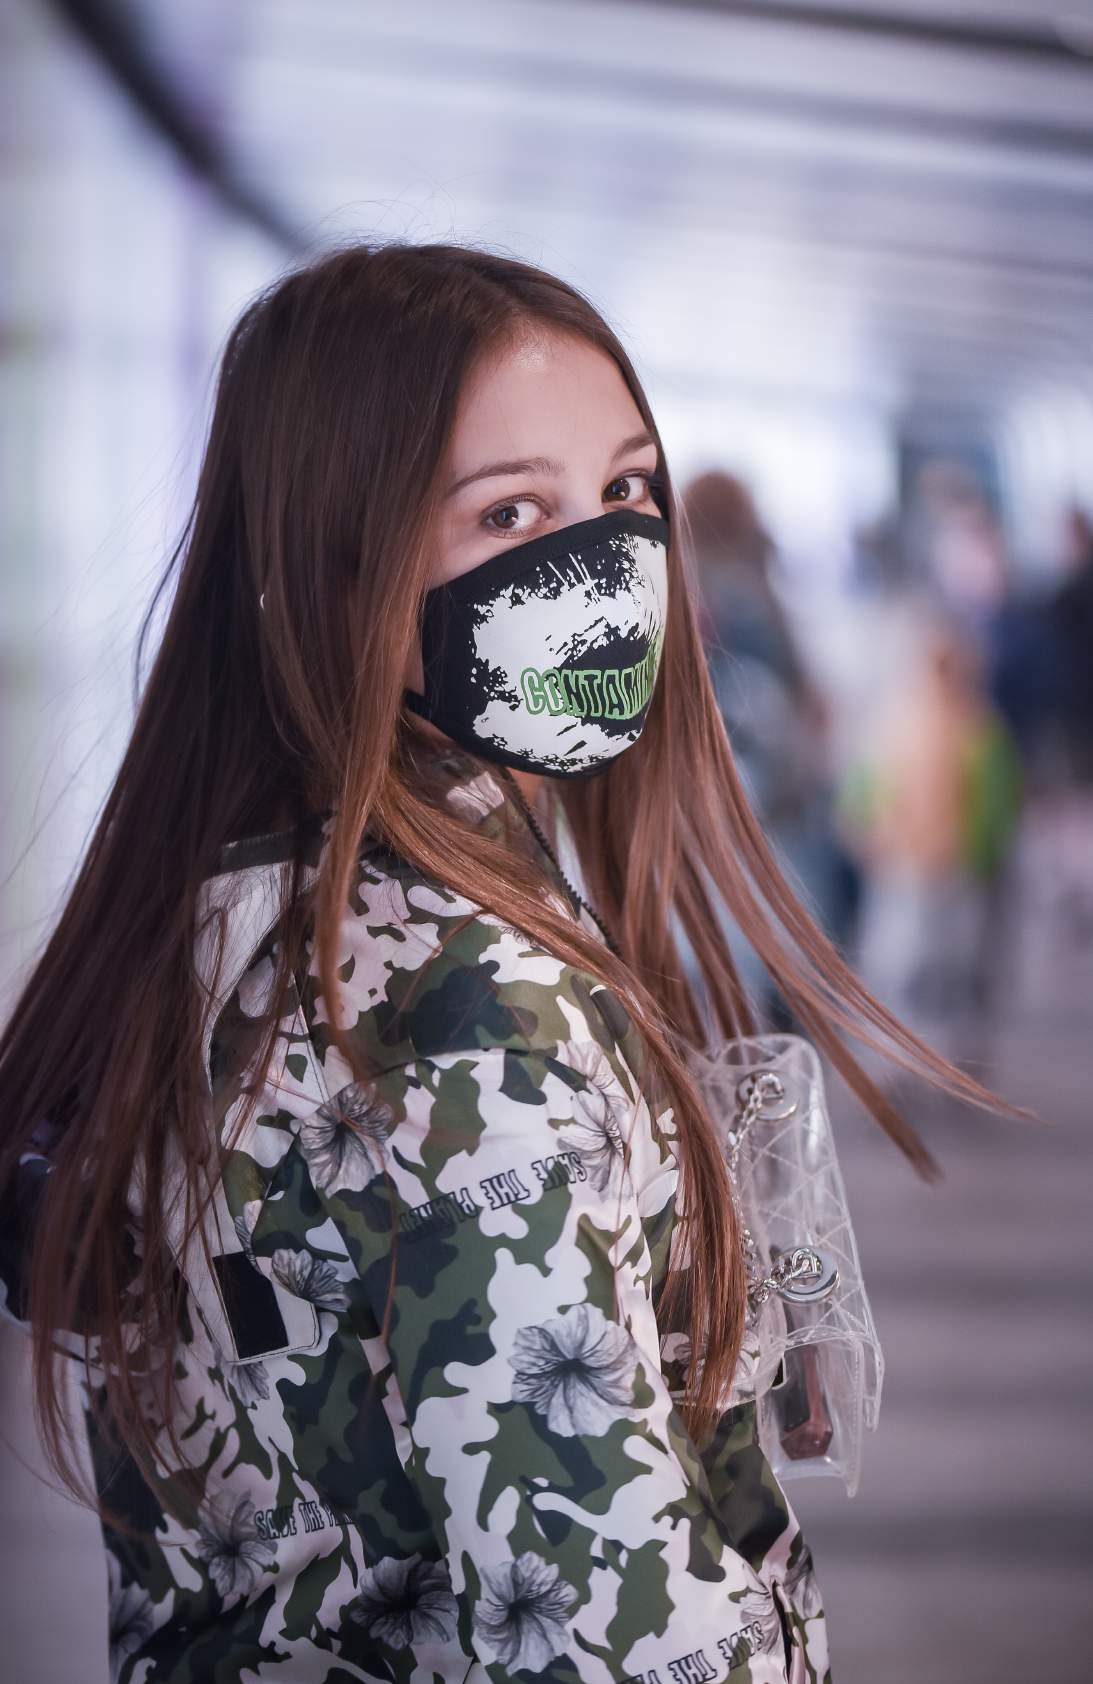 A girl wearing green and white coat and wearing a mask with a transparent sling around her neck is standing in the subway